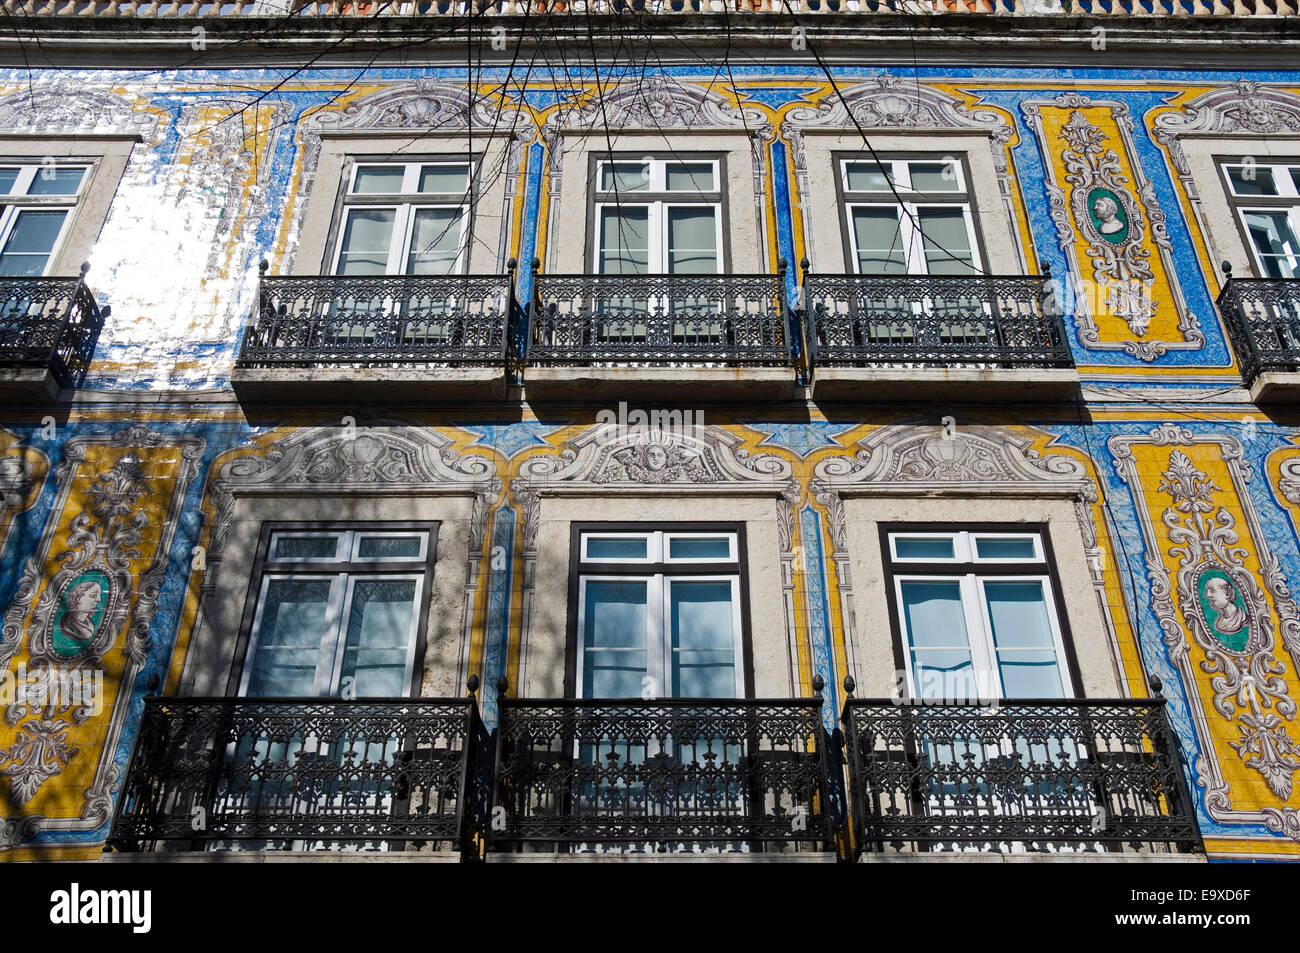 Horizontal close up of the decorative tiles covering a house in Lisbon. Stock Photo